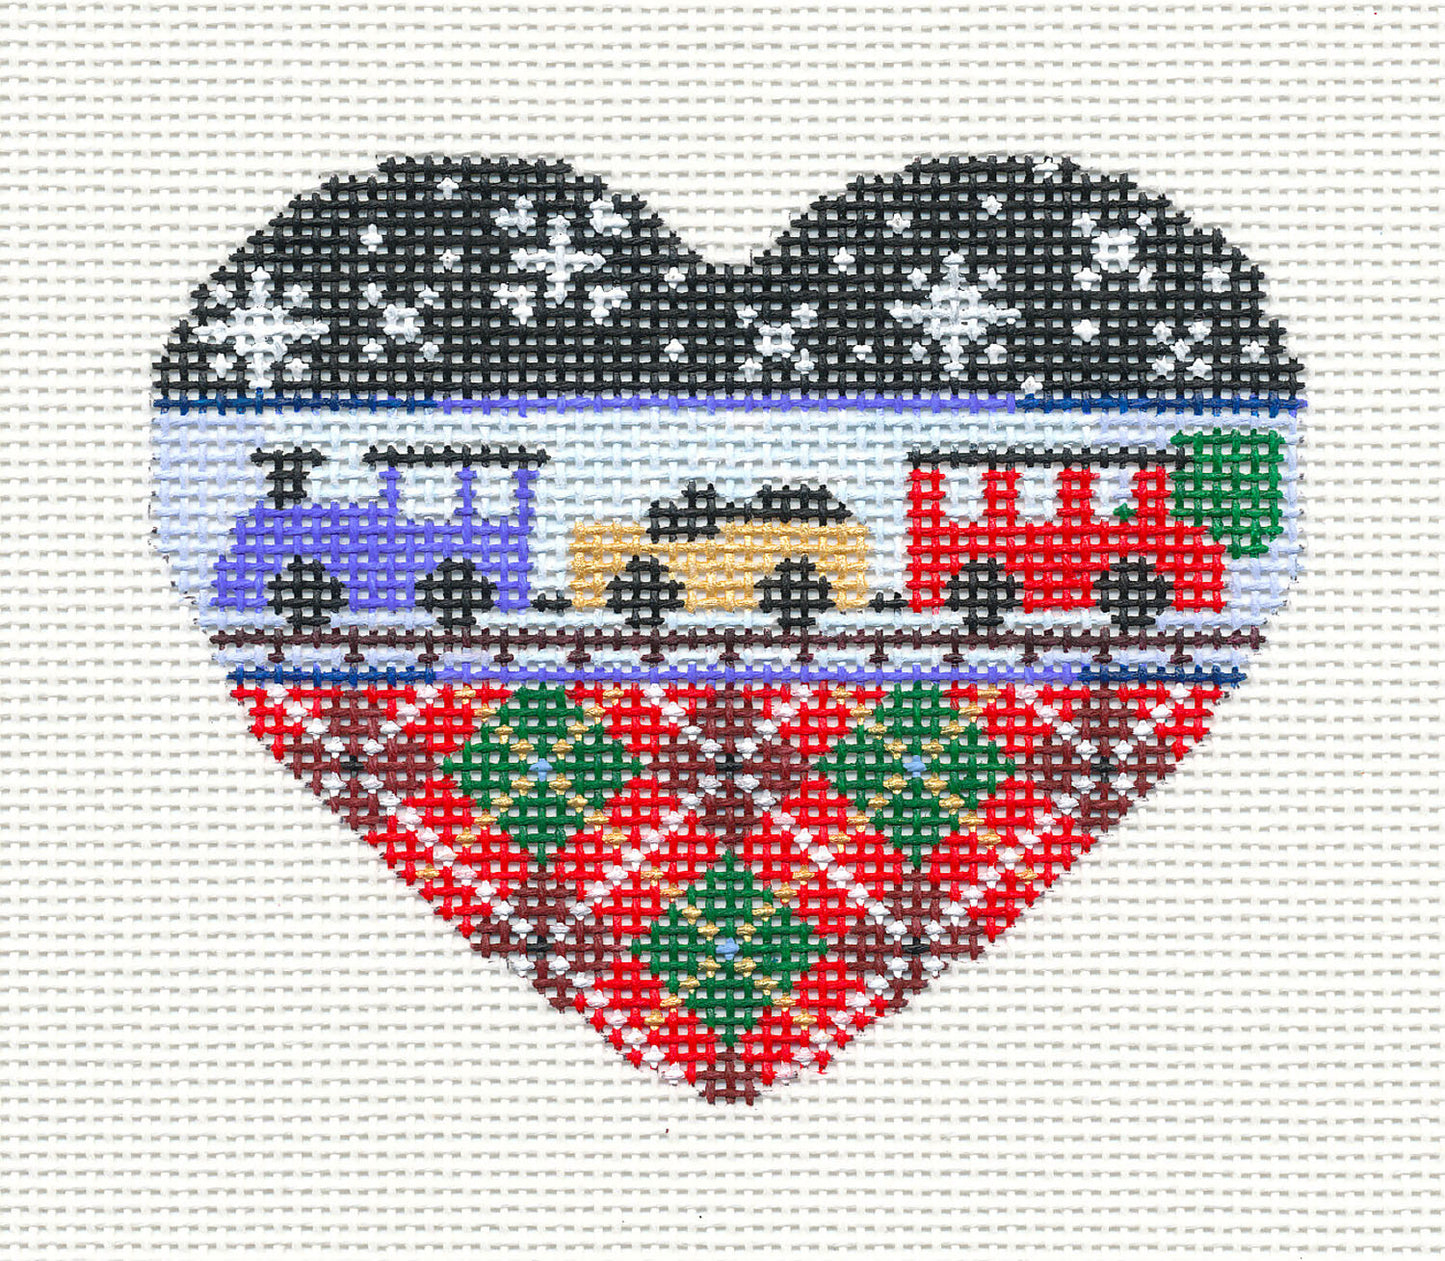 Heart ~ Child's Christmas TRAIN on Plaid Heart Handpainted Needlepoint Ornament by Associated Talents